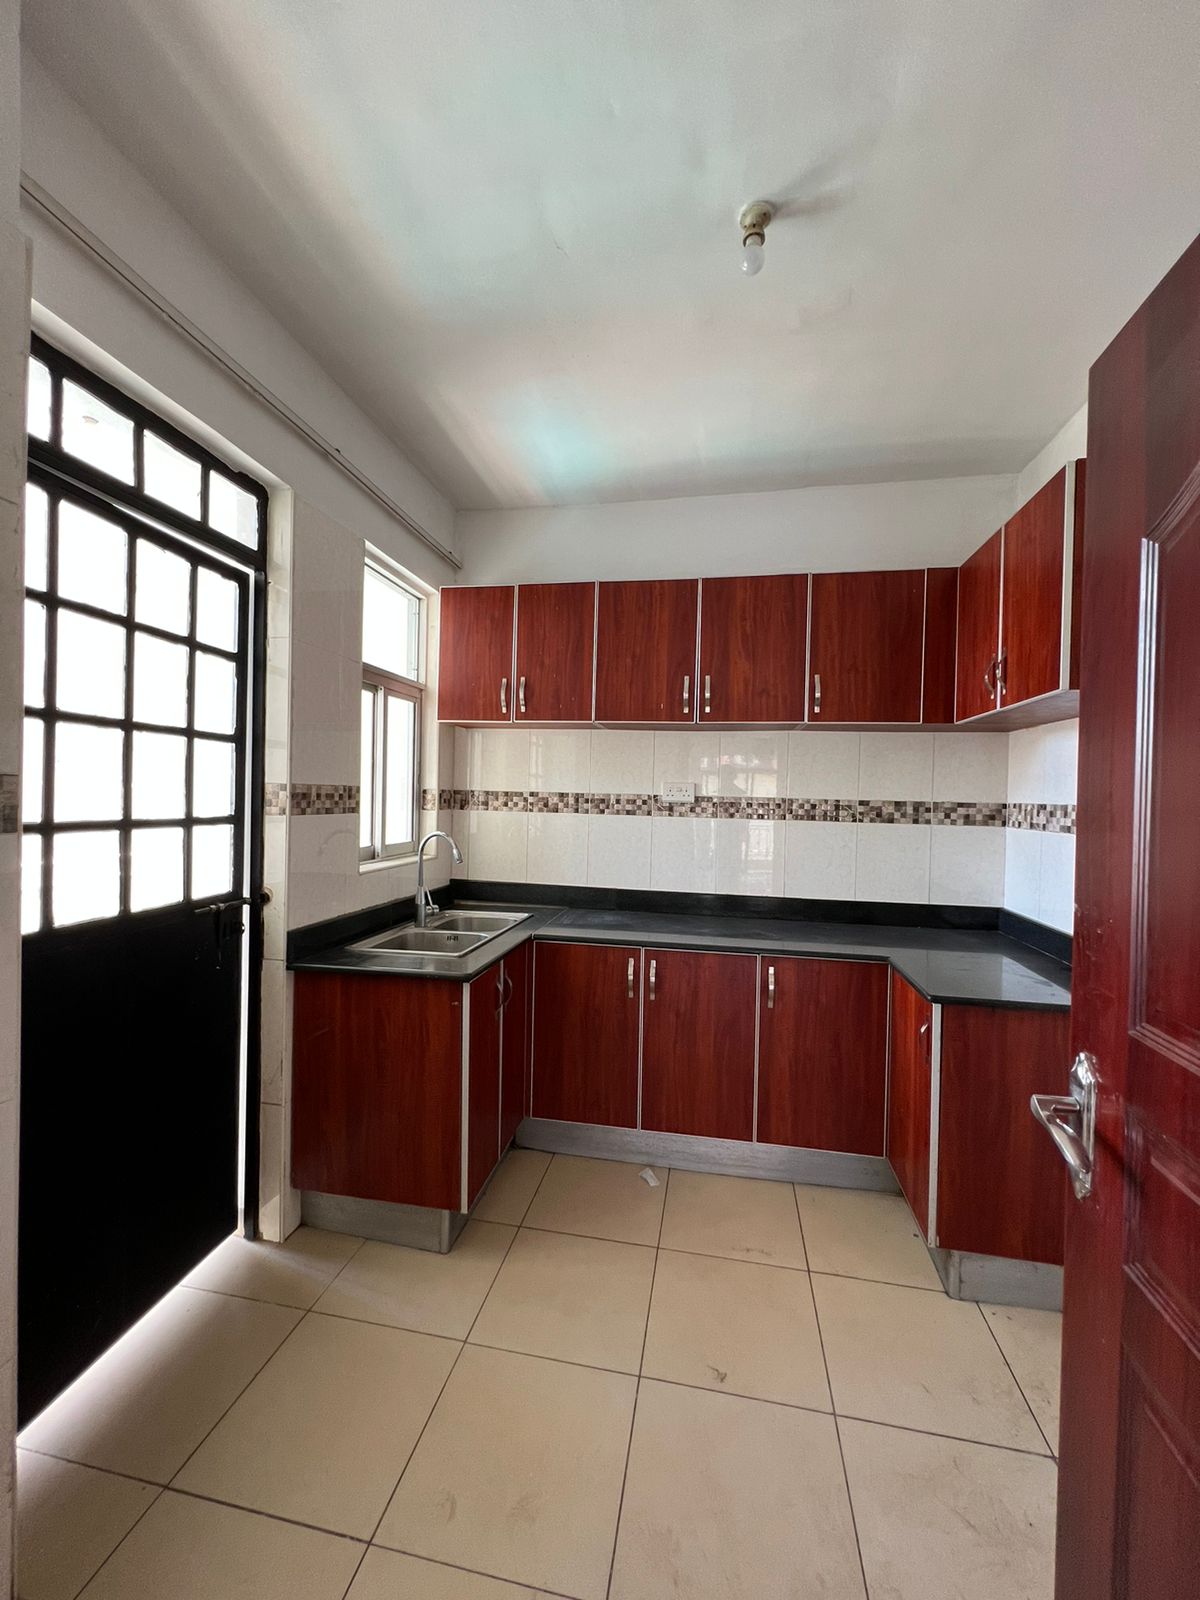 2 bedroom apartment to let in the heart of Kilimani, Nairobi. Has swimming pool, ample car parking, master bedroom en suite. Rent: 60,000. Musili homes